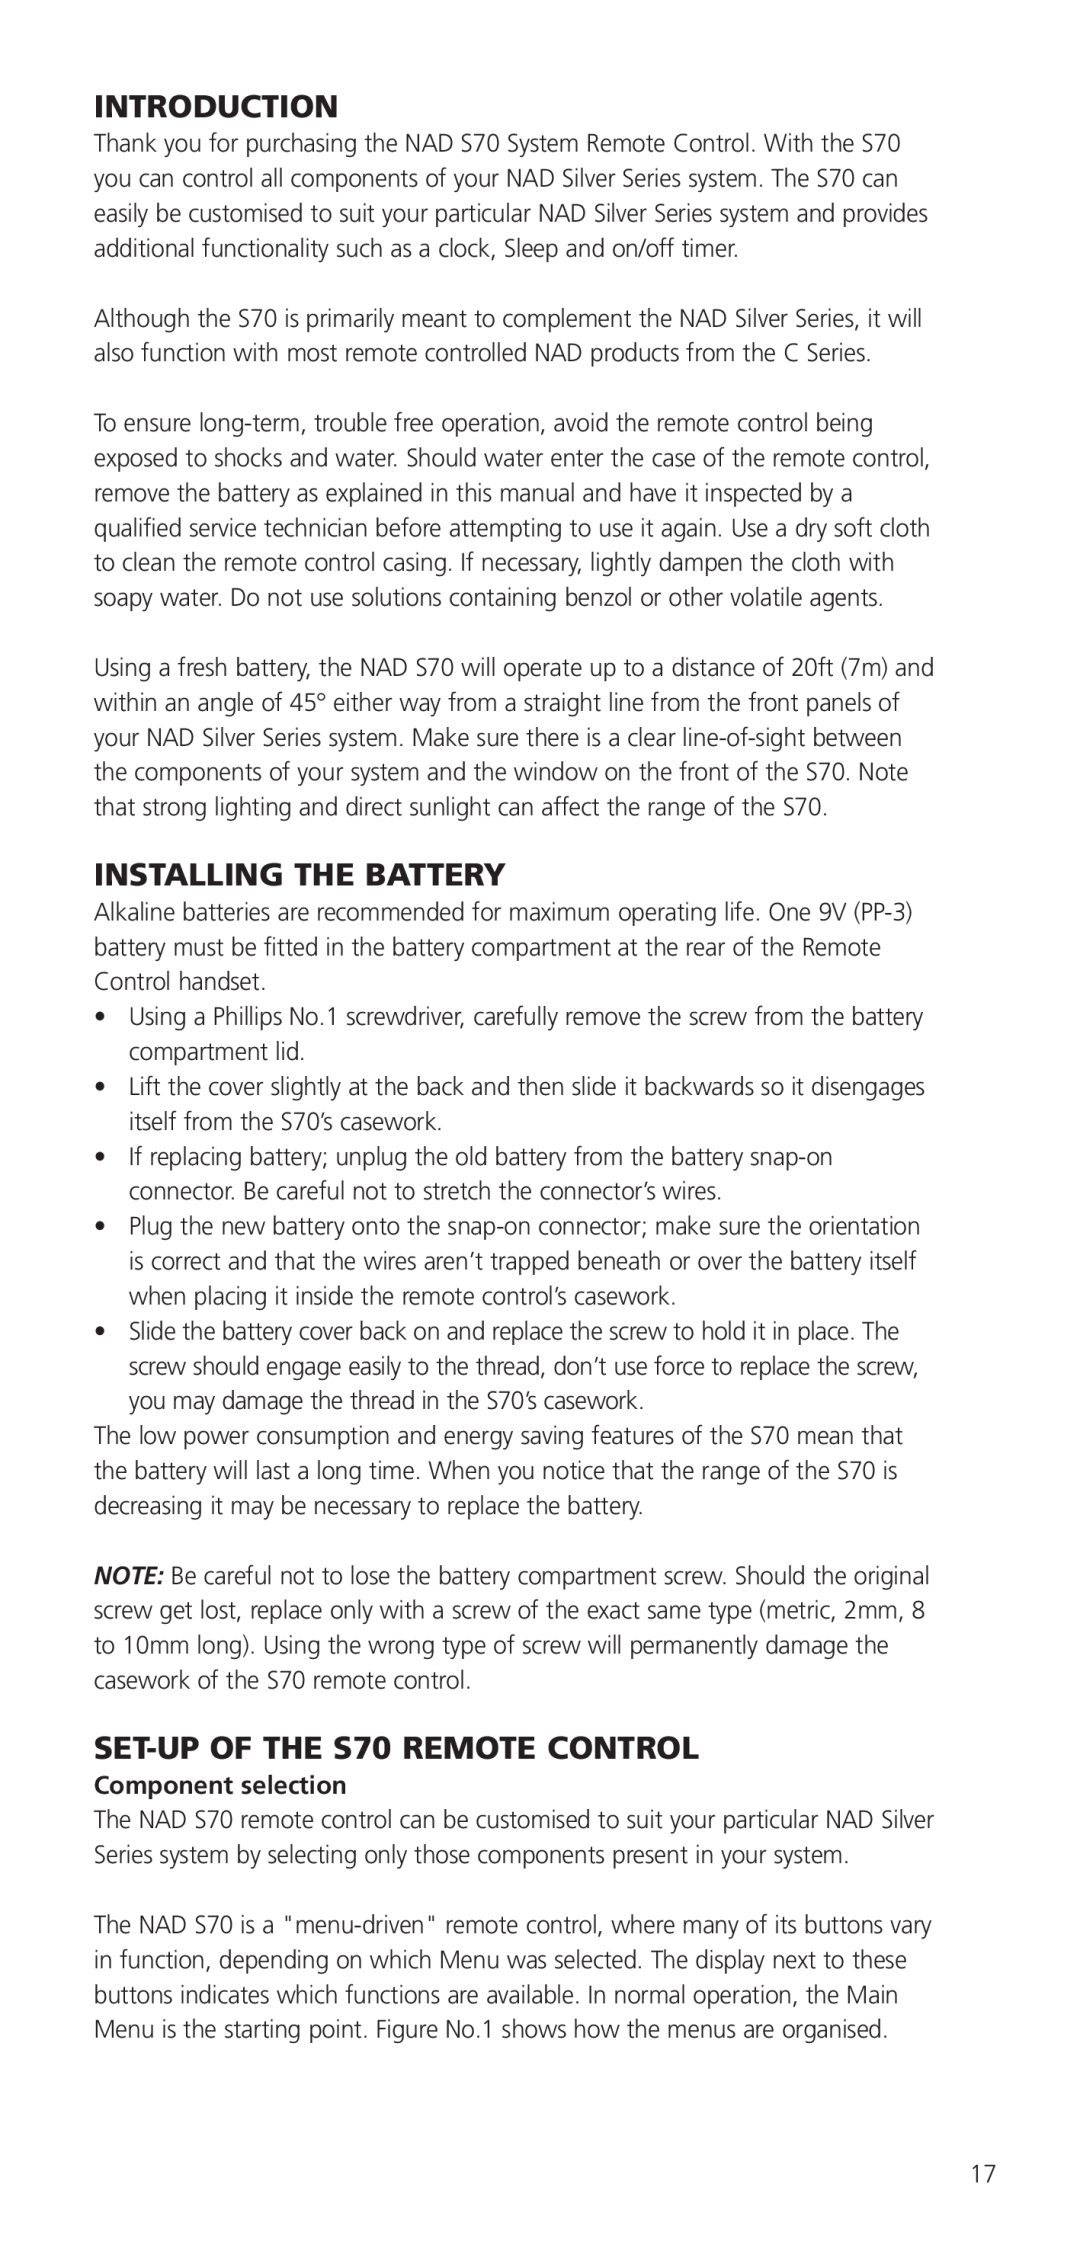 NAD owner manual Introduction, Installing The Battery, SET-UP OF THE S70 REMOTE CONTROL, Component selection 